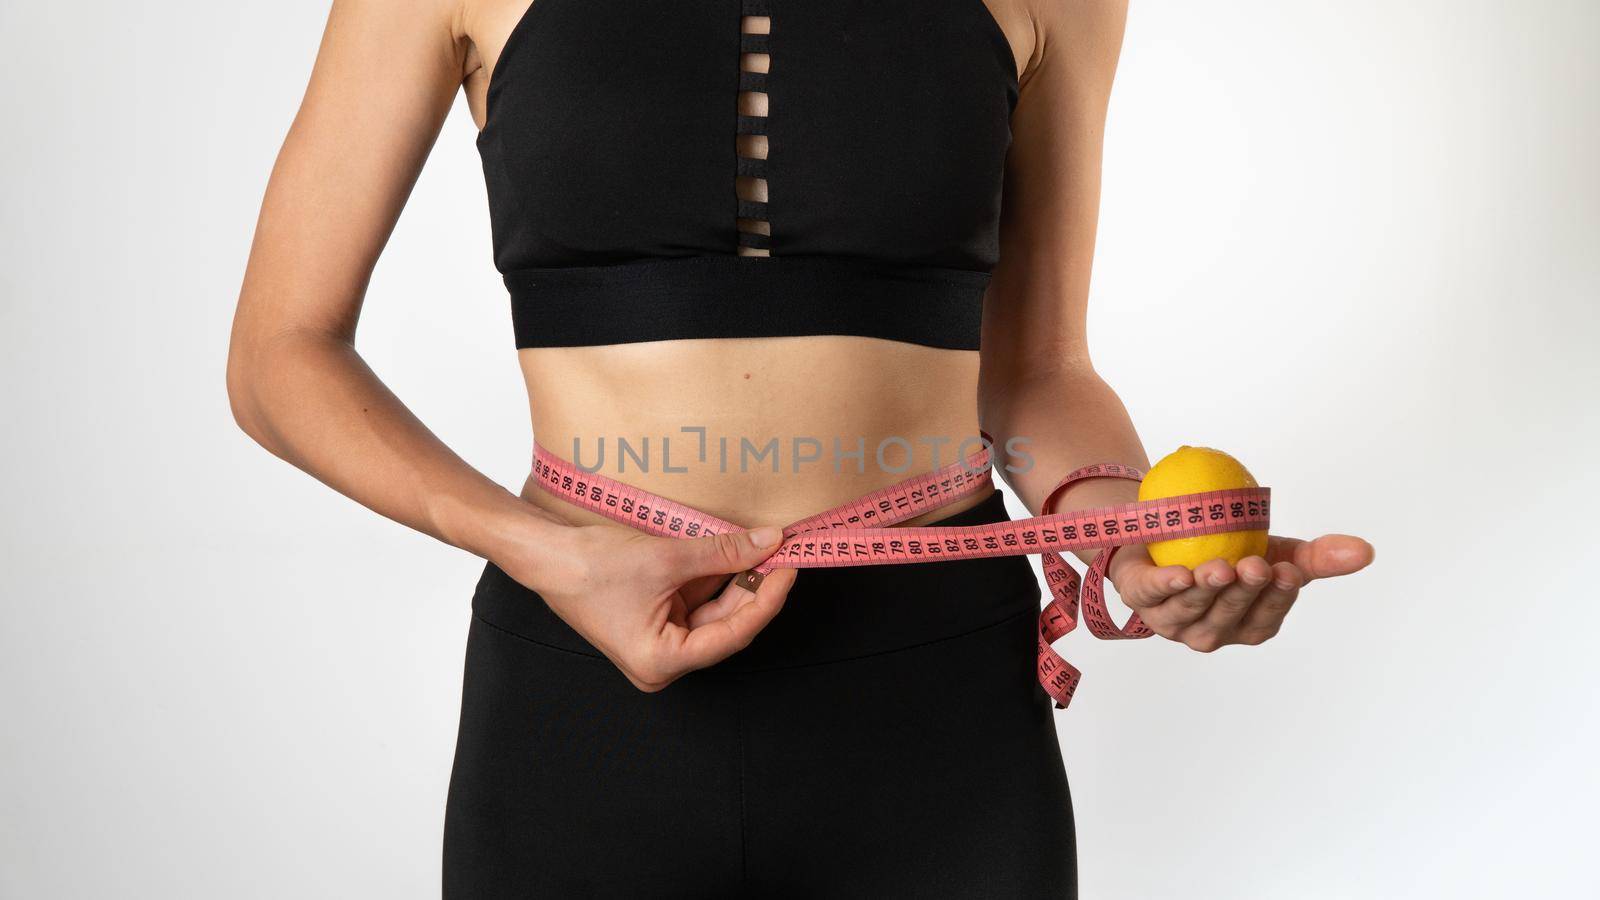 A woman measures the figure with a ribbon, a lemon in her hand - weight loss, healthy eating and sports by voktybre